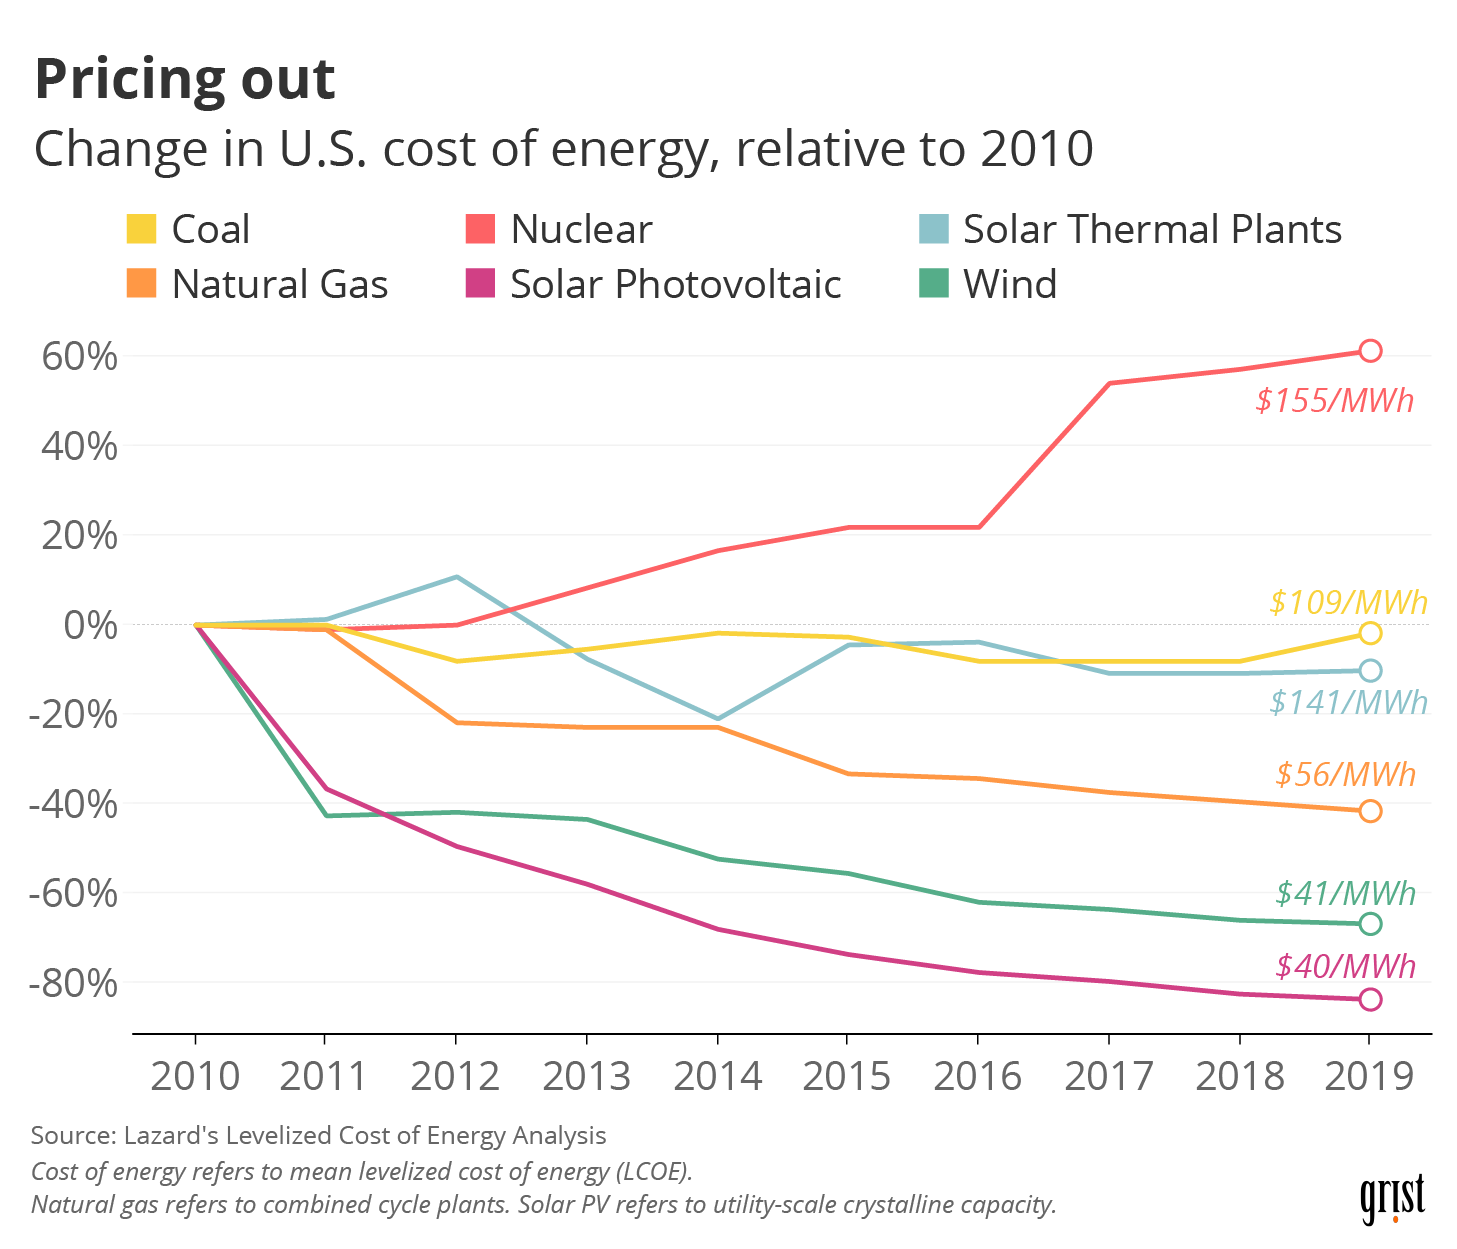 Line charts showing the percent change in the levelized cost of energy by source between 2010 and 2019